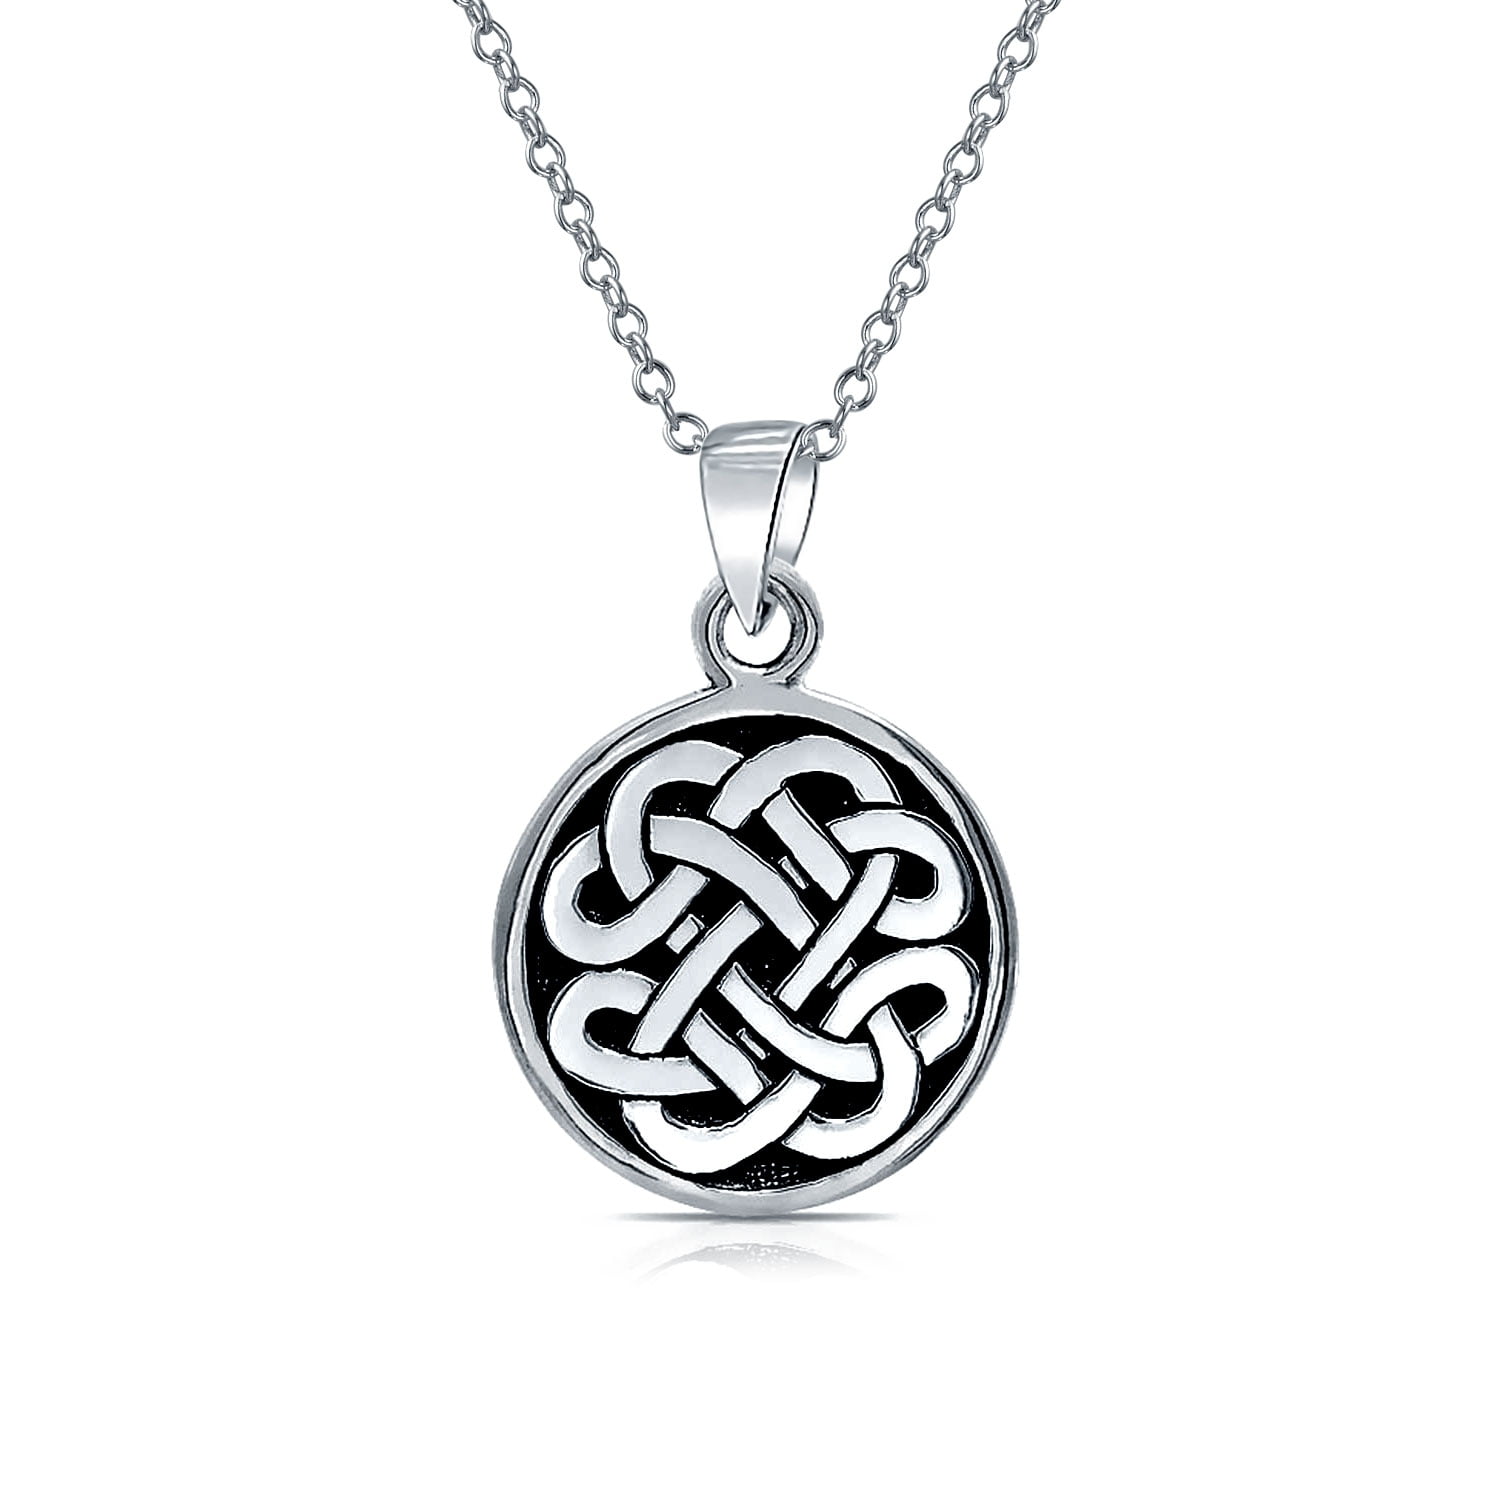 Trinity Eternity Love Friendship Symbol Celtic Knot Pendant Hand-Carved From Natural Stone By Myself Triquetra Charm Necklace Jewelry